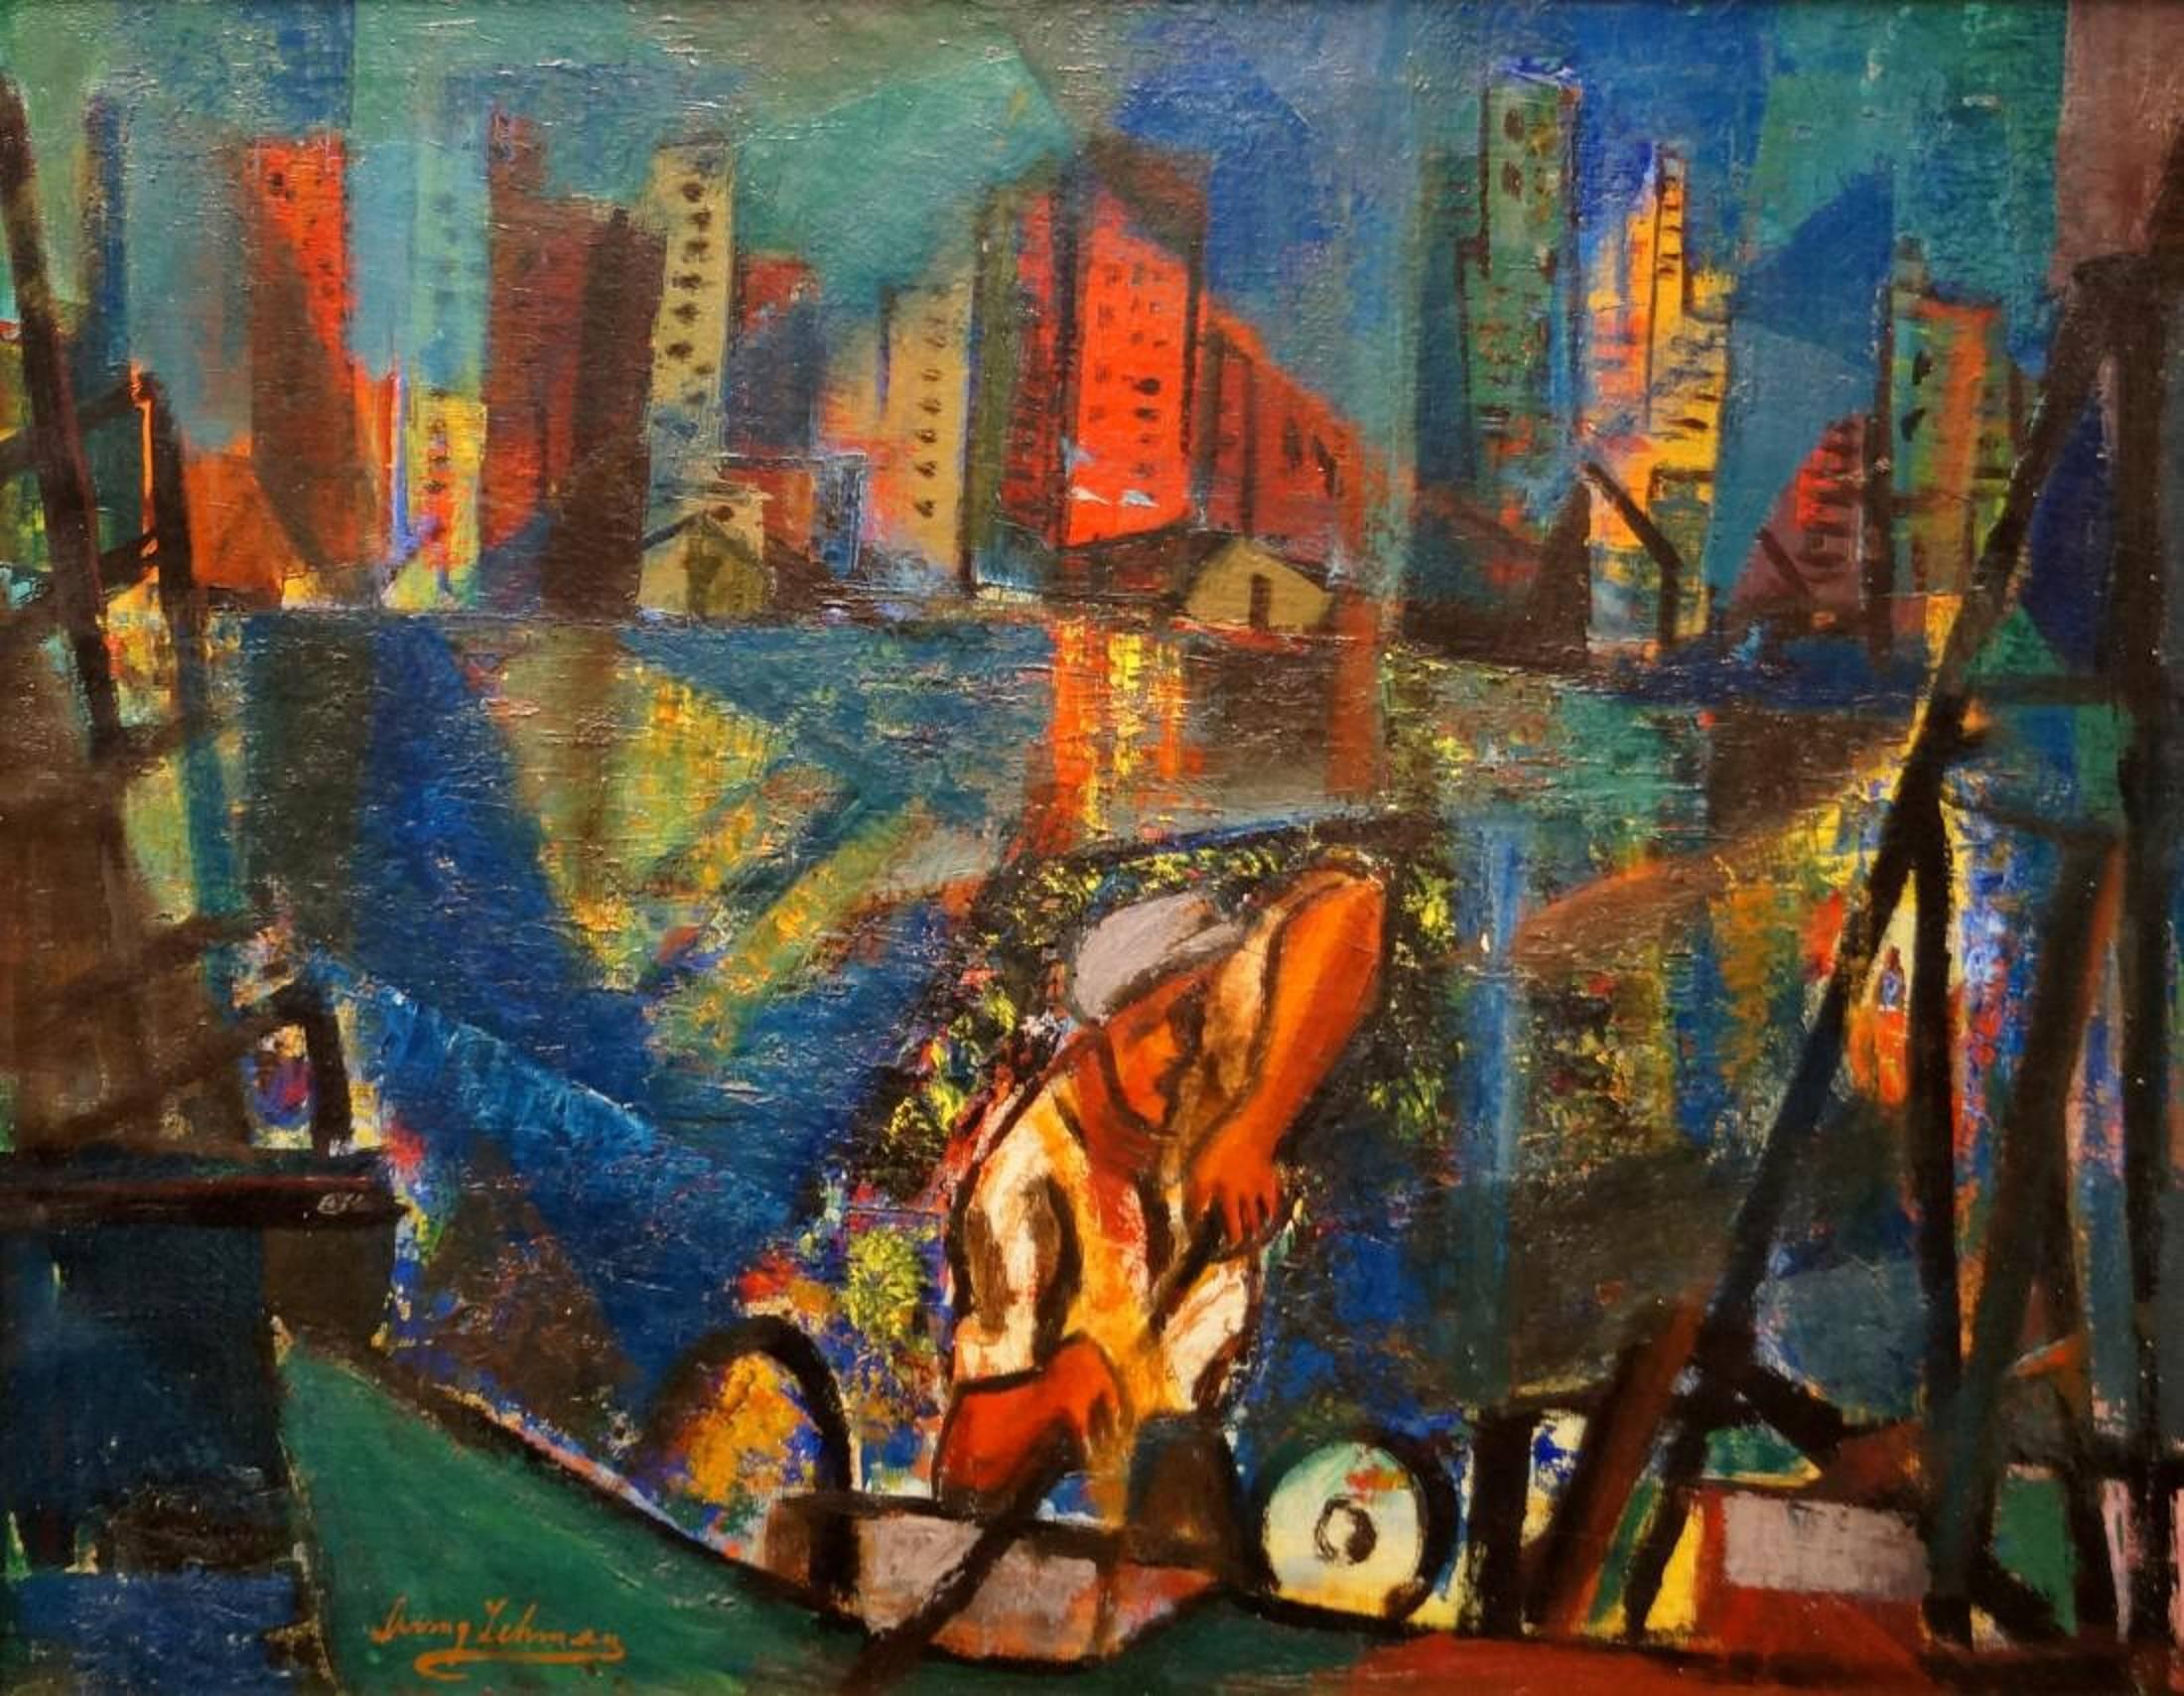 Constructivist Steelworker, Rare WPA oil painting, Manhattan NYC - Painting by Irving George Lehman